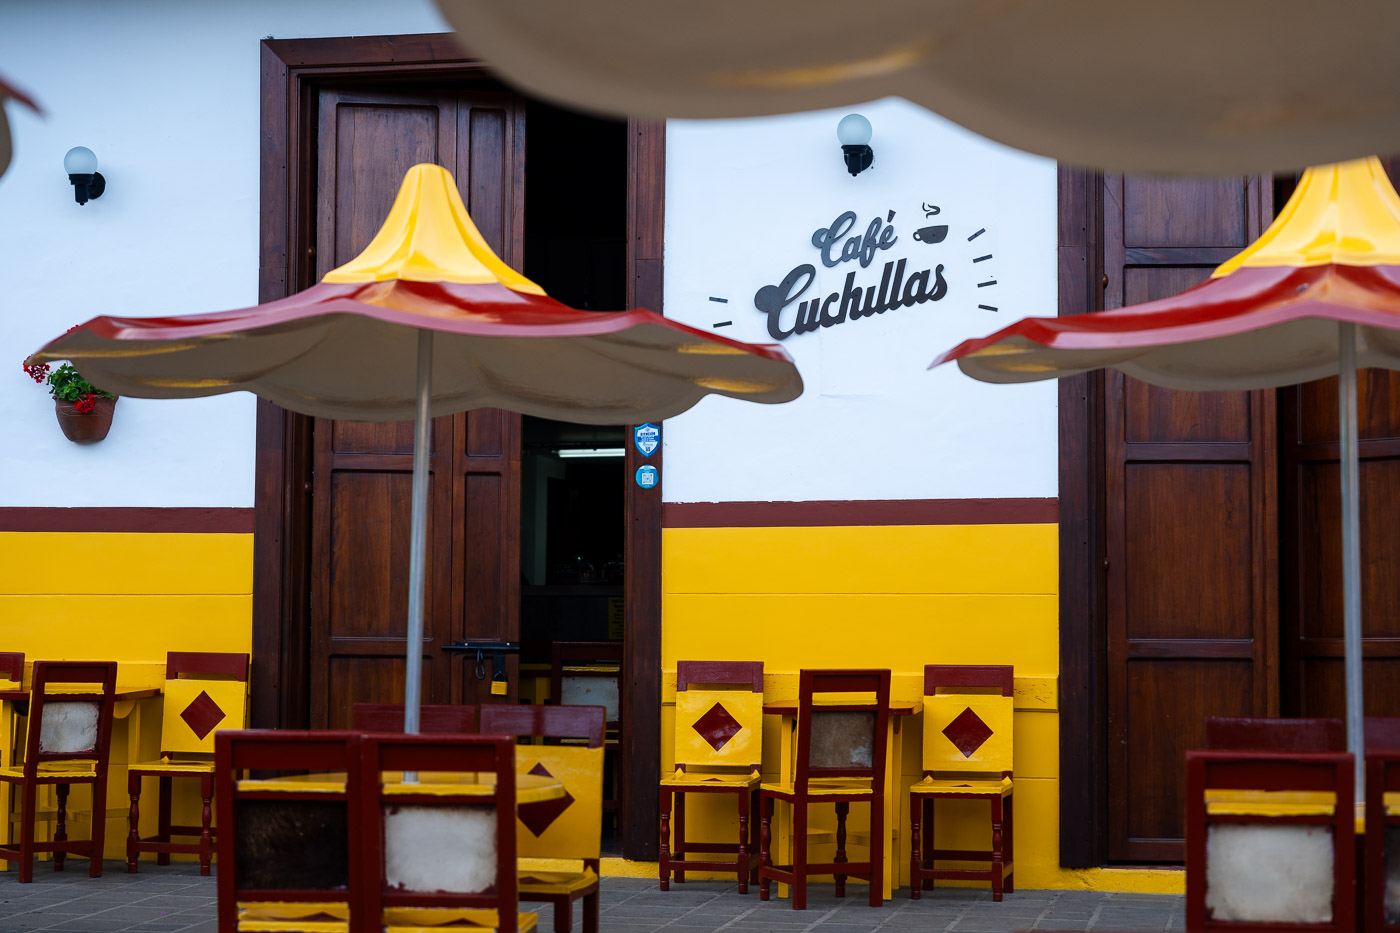 The yellow, white and red exterior for Cafe Cuchillas in Jardin main square.